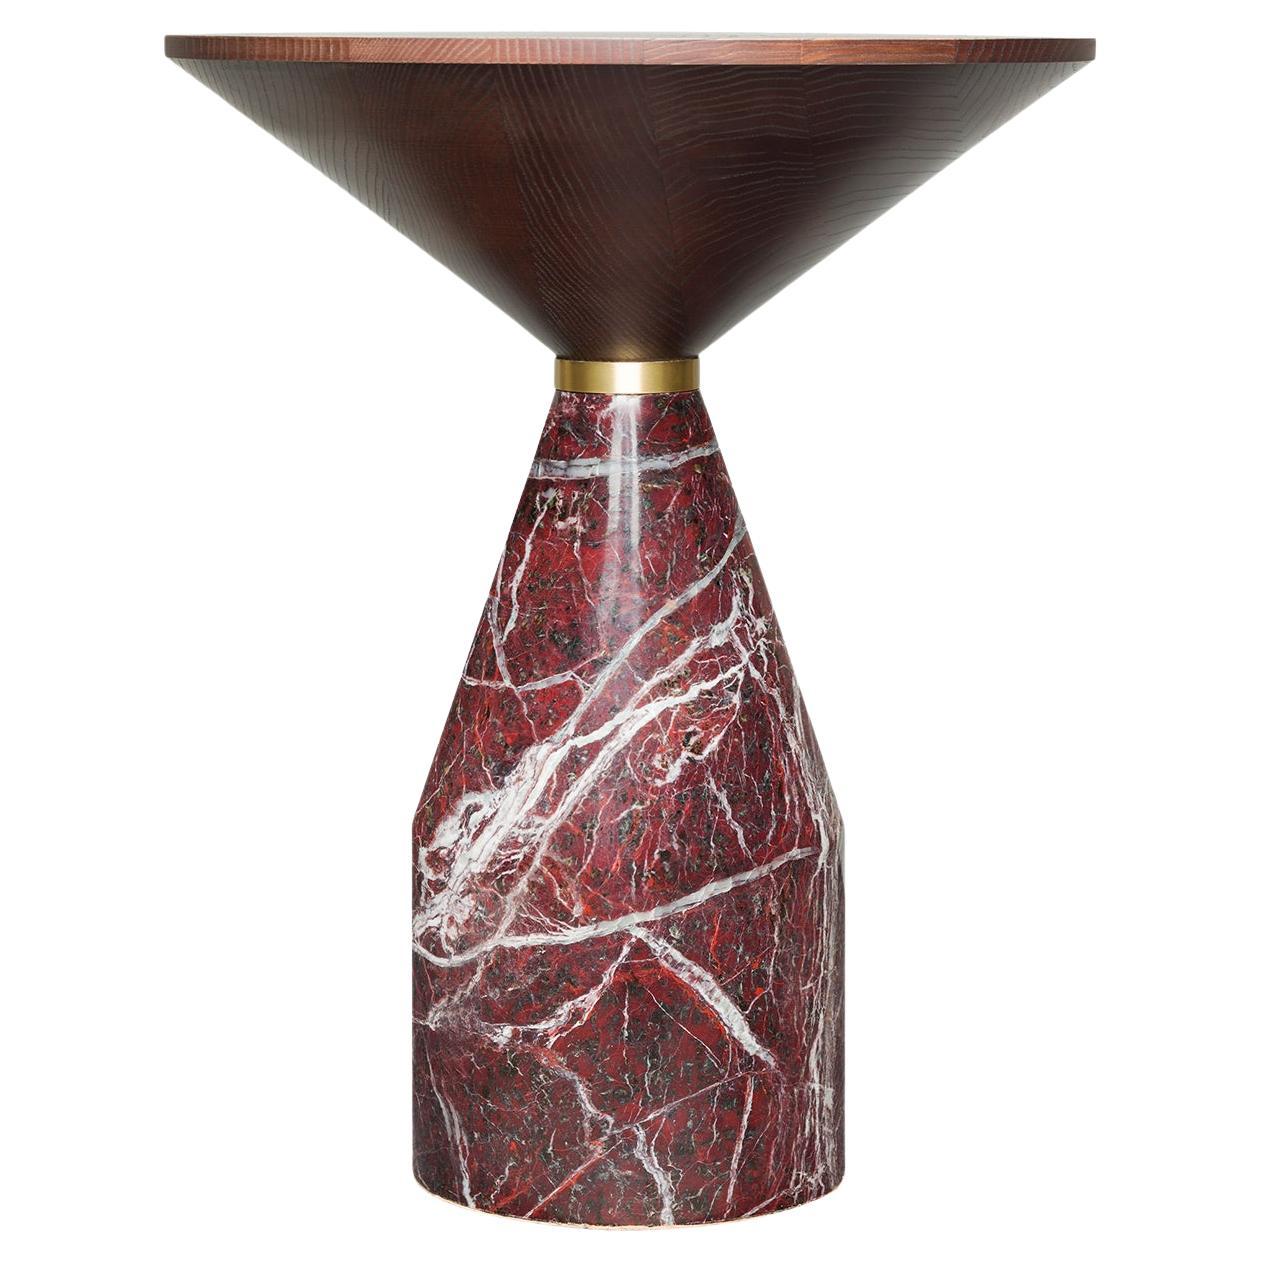 Cino Small Red Marbl Table For Sale